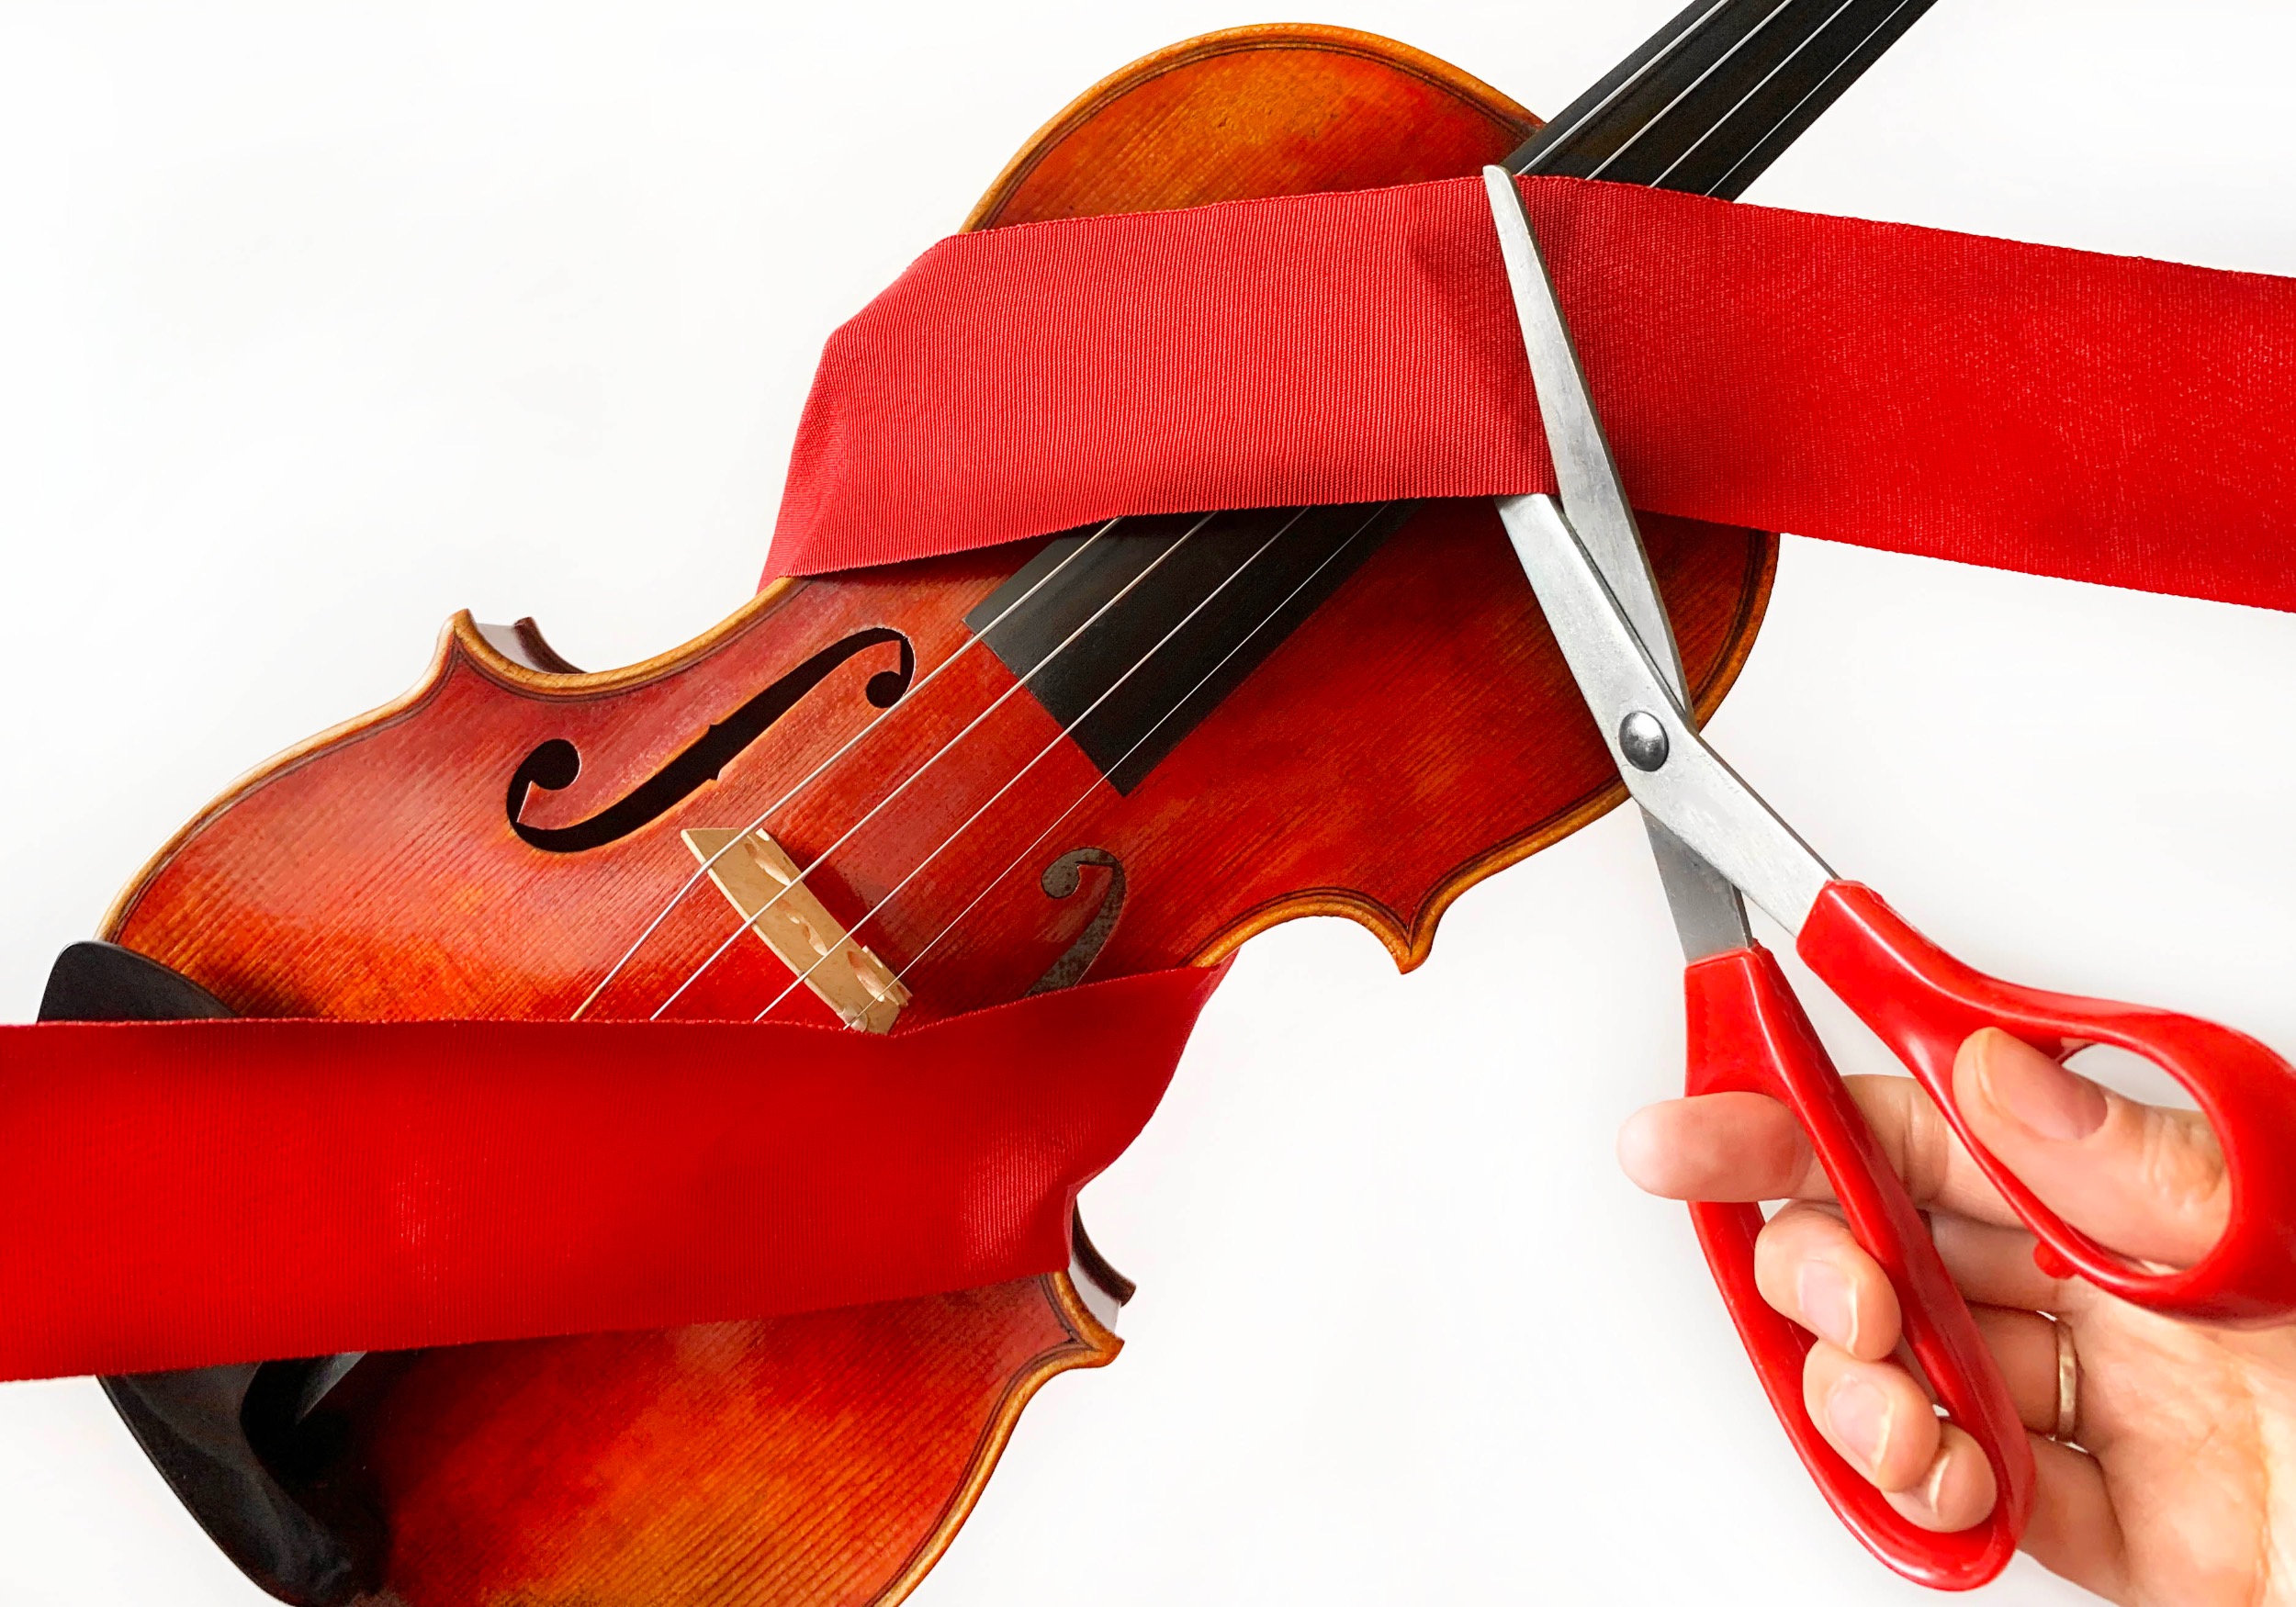 Hand with red handled scissors cutting a red ribbon wrapped around a violin